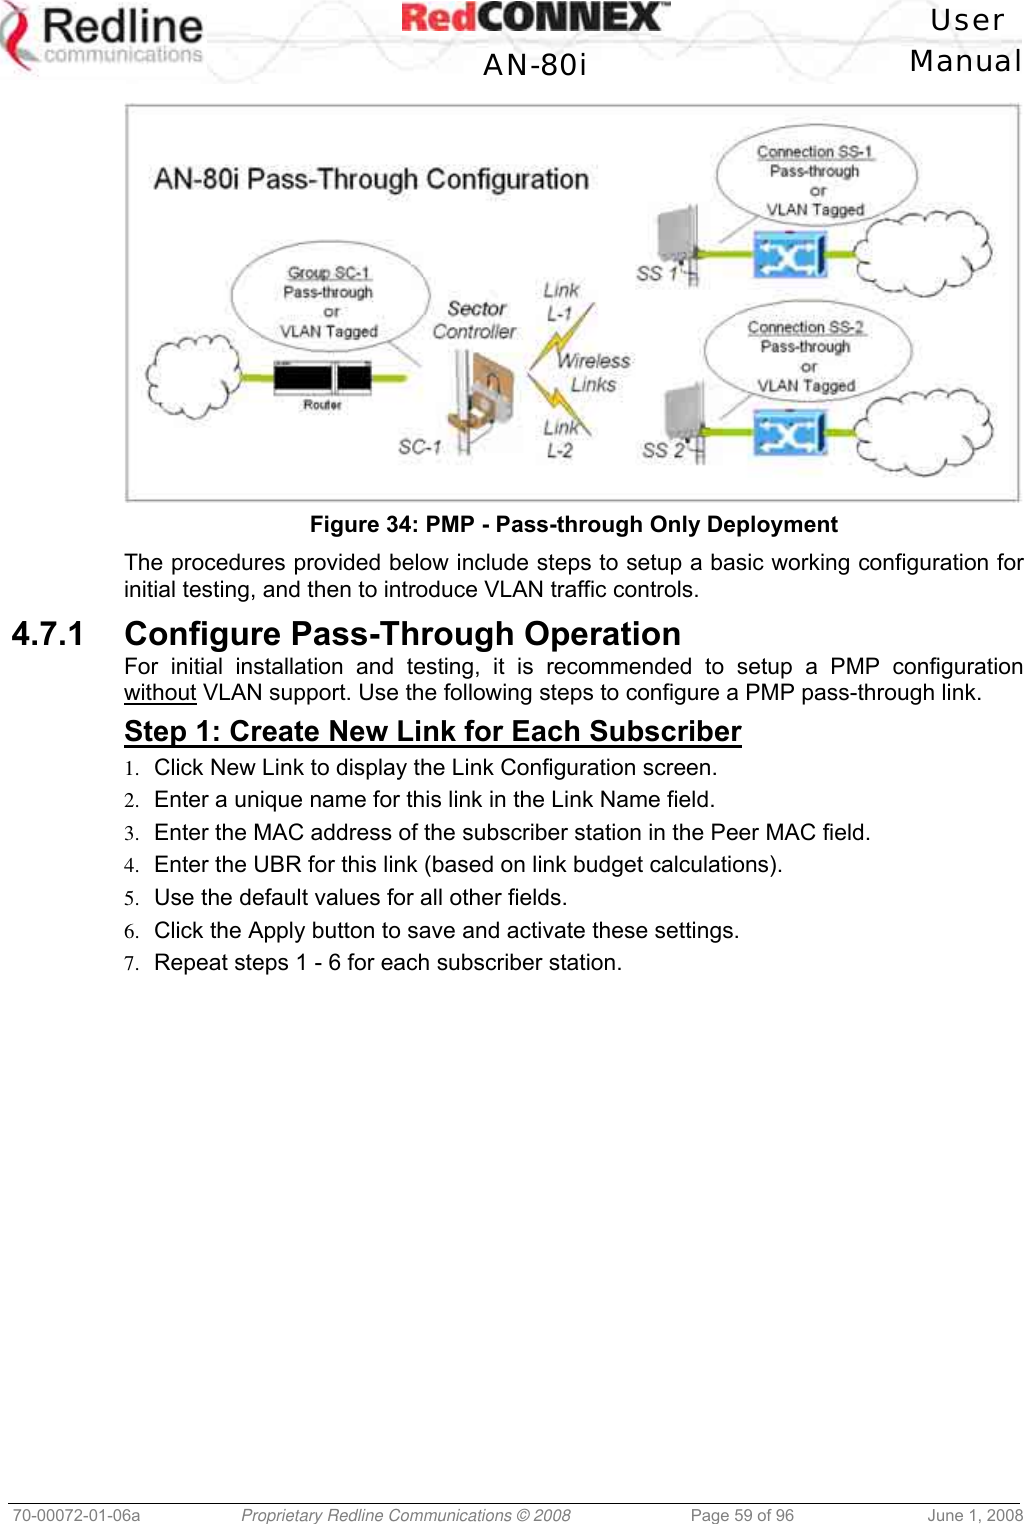   User  AN-80i Manual  70-00072-01-06a  Proprietary Redline Communications © 2008  Page 59 of 96  June 1, 2008  Figure 34: PMP - Pass-through Only Deployment The procedures provided below include steps to setup a basic working configuration for initial testing, and then to introduce VLAN traffic controls. 4.7.1  Configure Pass-Through Operation  For initial installation and testing, it is recommended to setup a PMP configuration without VLAN support. Use the following steps to configure a PMP pass-through link. Step 1: Create New Link for Each Subscriber 1.  Click New Link to display the Link Configuration screen. 2.  Enter a unique name for this link in the Link Name field. 3.  Enter the MAC address of the subscriber station in the Peer MAC field. 4.  Enter the UBR for this link (based on link budget calculations). 5.  Use the default values for all other fields. 6.  Click the Apply button to save and activate these settings. 7.  Repeat steps 1 - 6 for each subscriber station. 